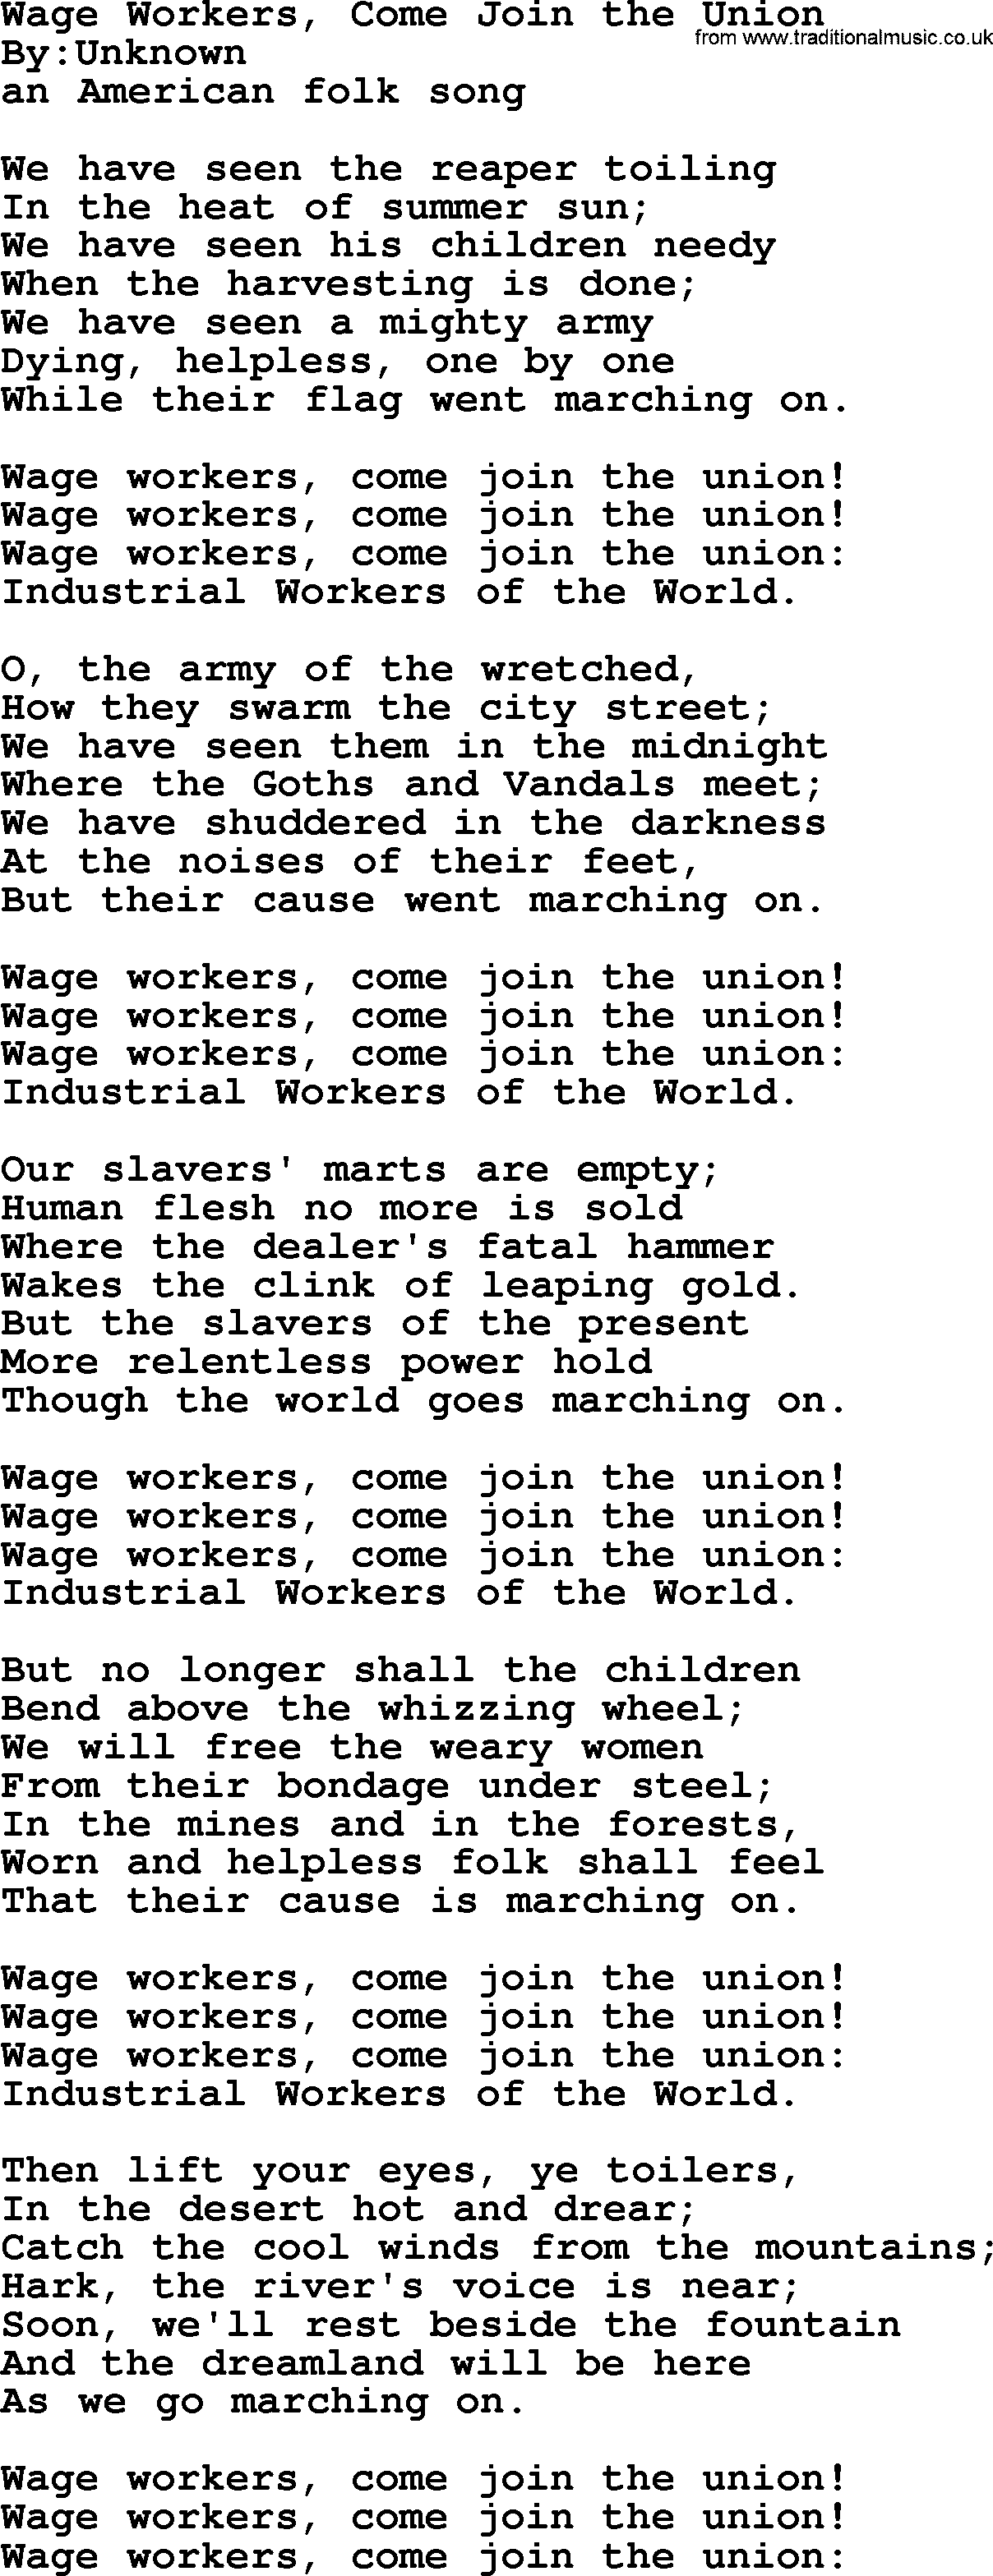 Political, Solidarity, Workers or Union song: Wage Workers Come Join The Union, lyrics